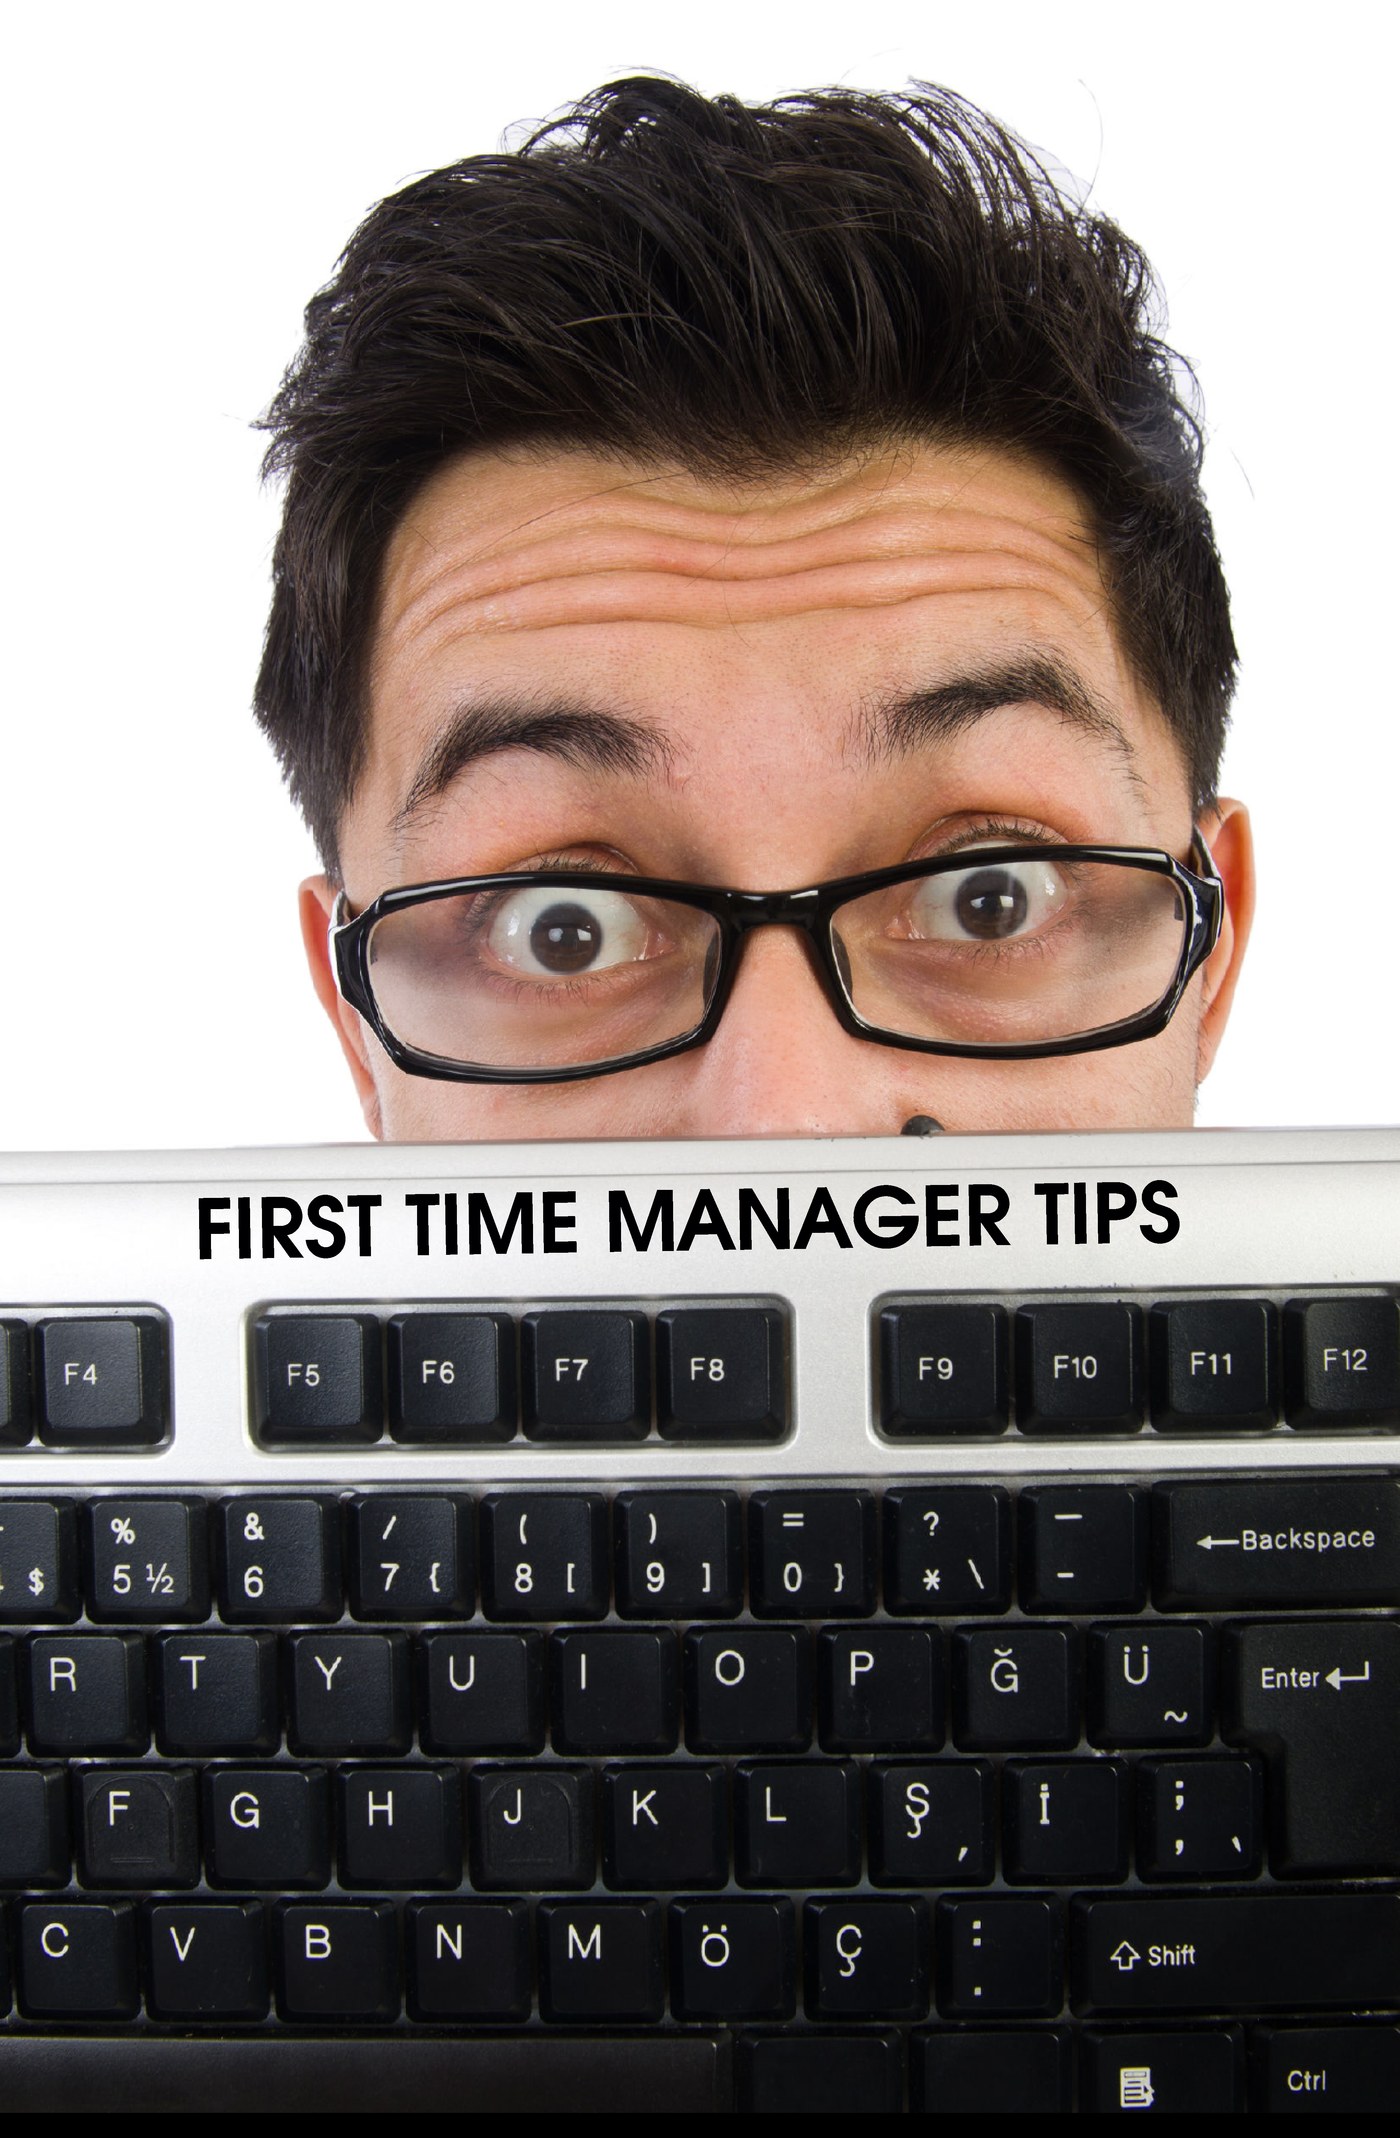 L7060 - First Time Manager Tips